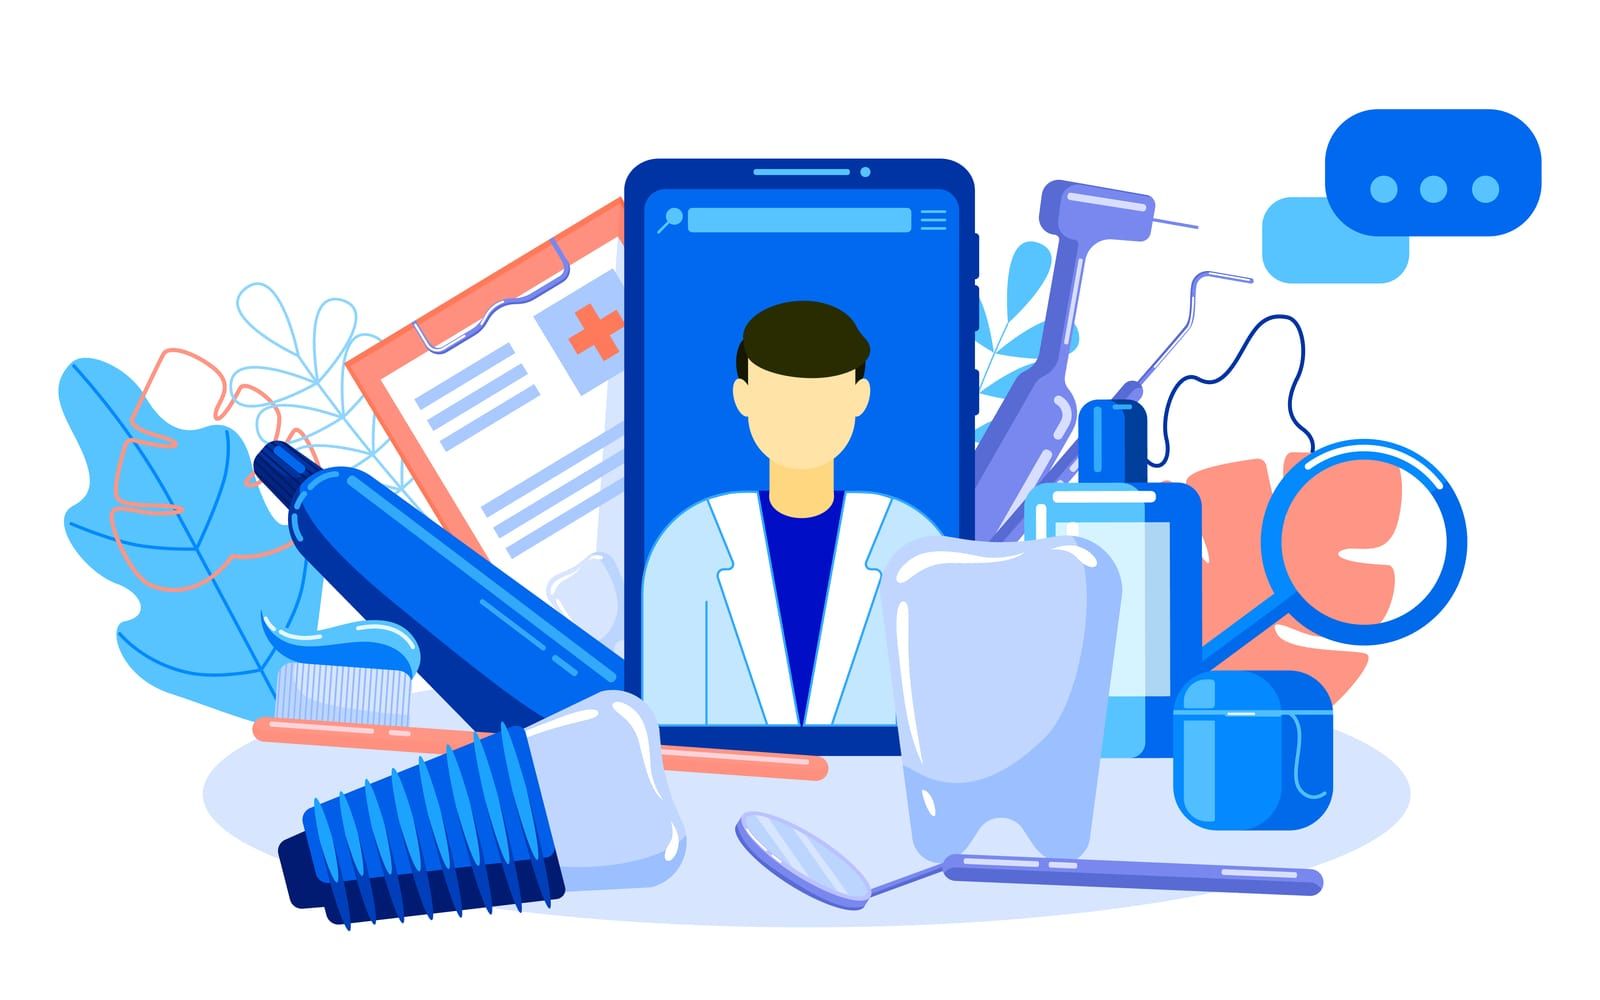 Illustration Of Dentist In A Phone And Lot Of Dental Items Like A Tooth, Implant, Toothpaste, Handpiece, Dental Floss, Mirror And Mouthwach